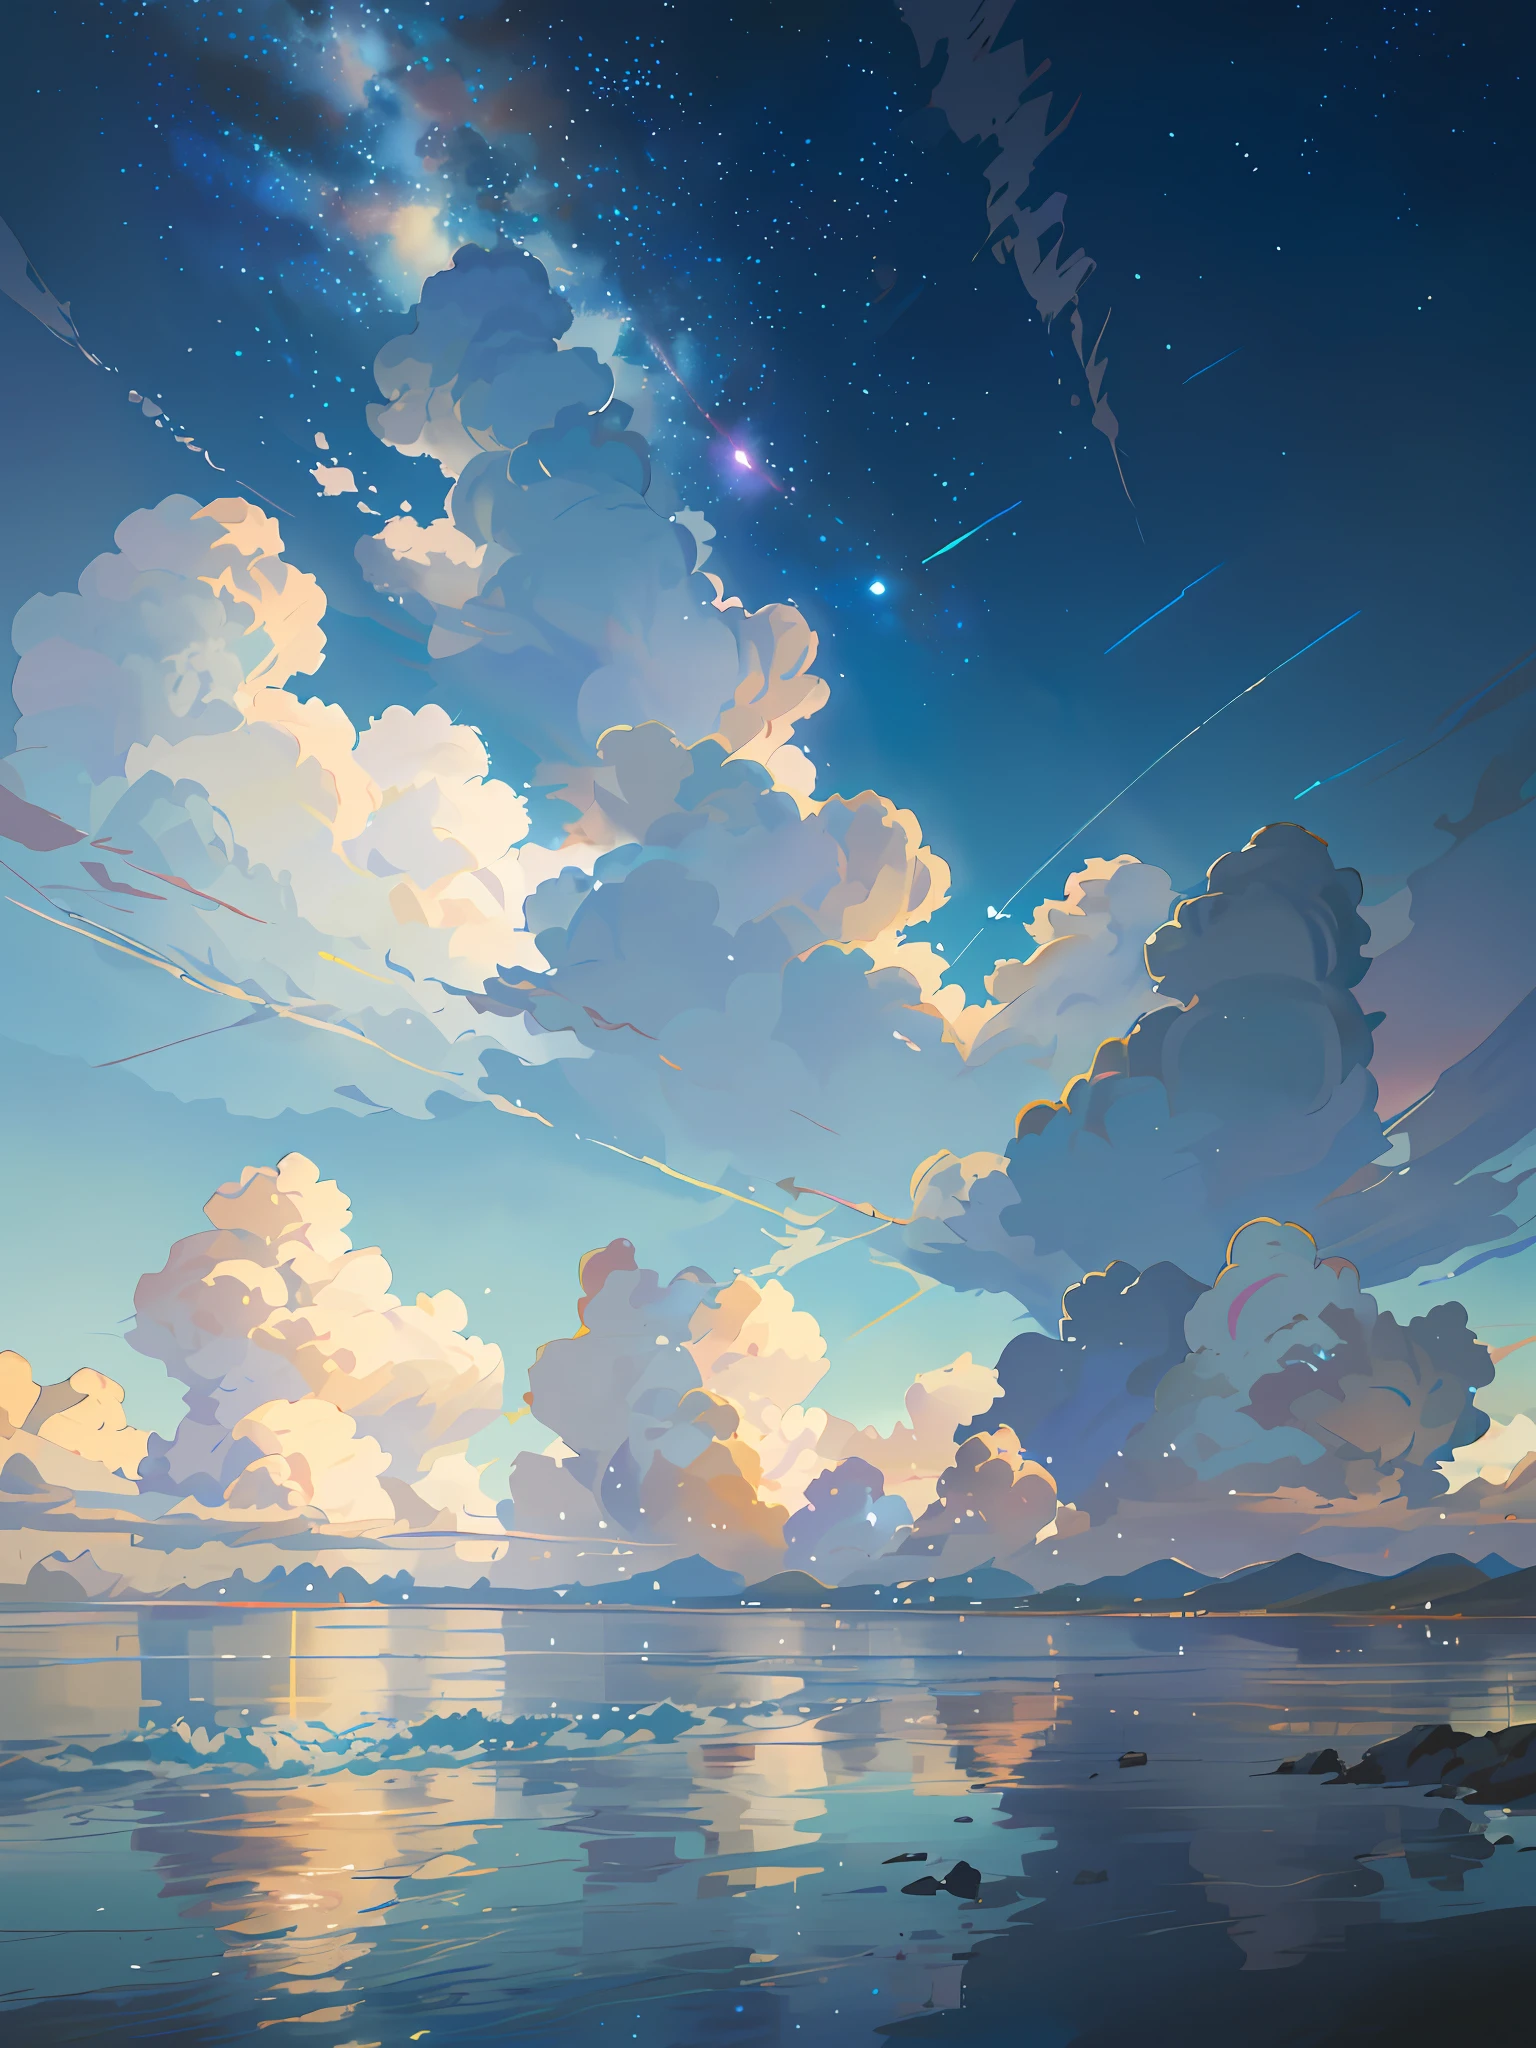 There is a picture of the sky with clouds and stars, space sky. By Makoto Shinkai, Anime Sky, Anime Clouds, Blue Sea. Makoto Shinkai, Makoto Shinkai's style, Makoto Shinkai's style, Los Tran. Inspired by the scenic background, Makoto Shinkai, Makoto Shinkai. - H 2160, summer, Makoto Shinkai concept art, tumblr, magical realism, beautiful anime scene, beautiful sky. Makoto Shinkai, ((Xin Haicheng)), anime background art, anime background, Makoto Shinkai's style, anime movie background, galaxy express, no human